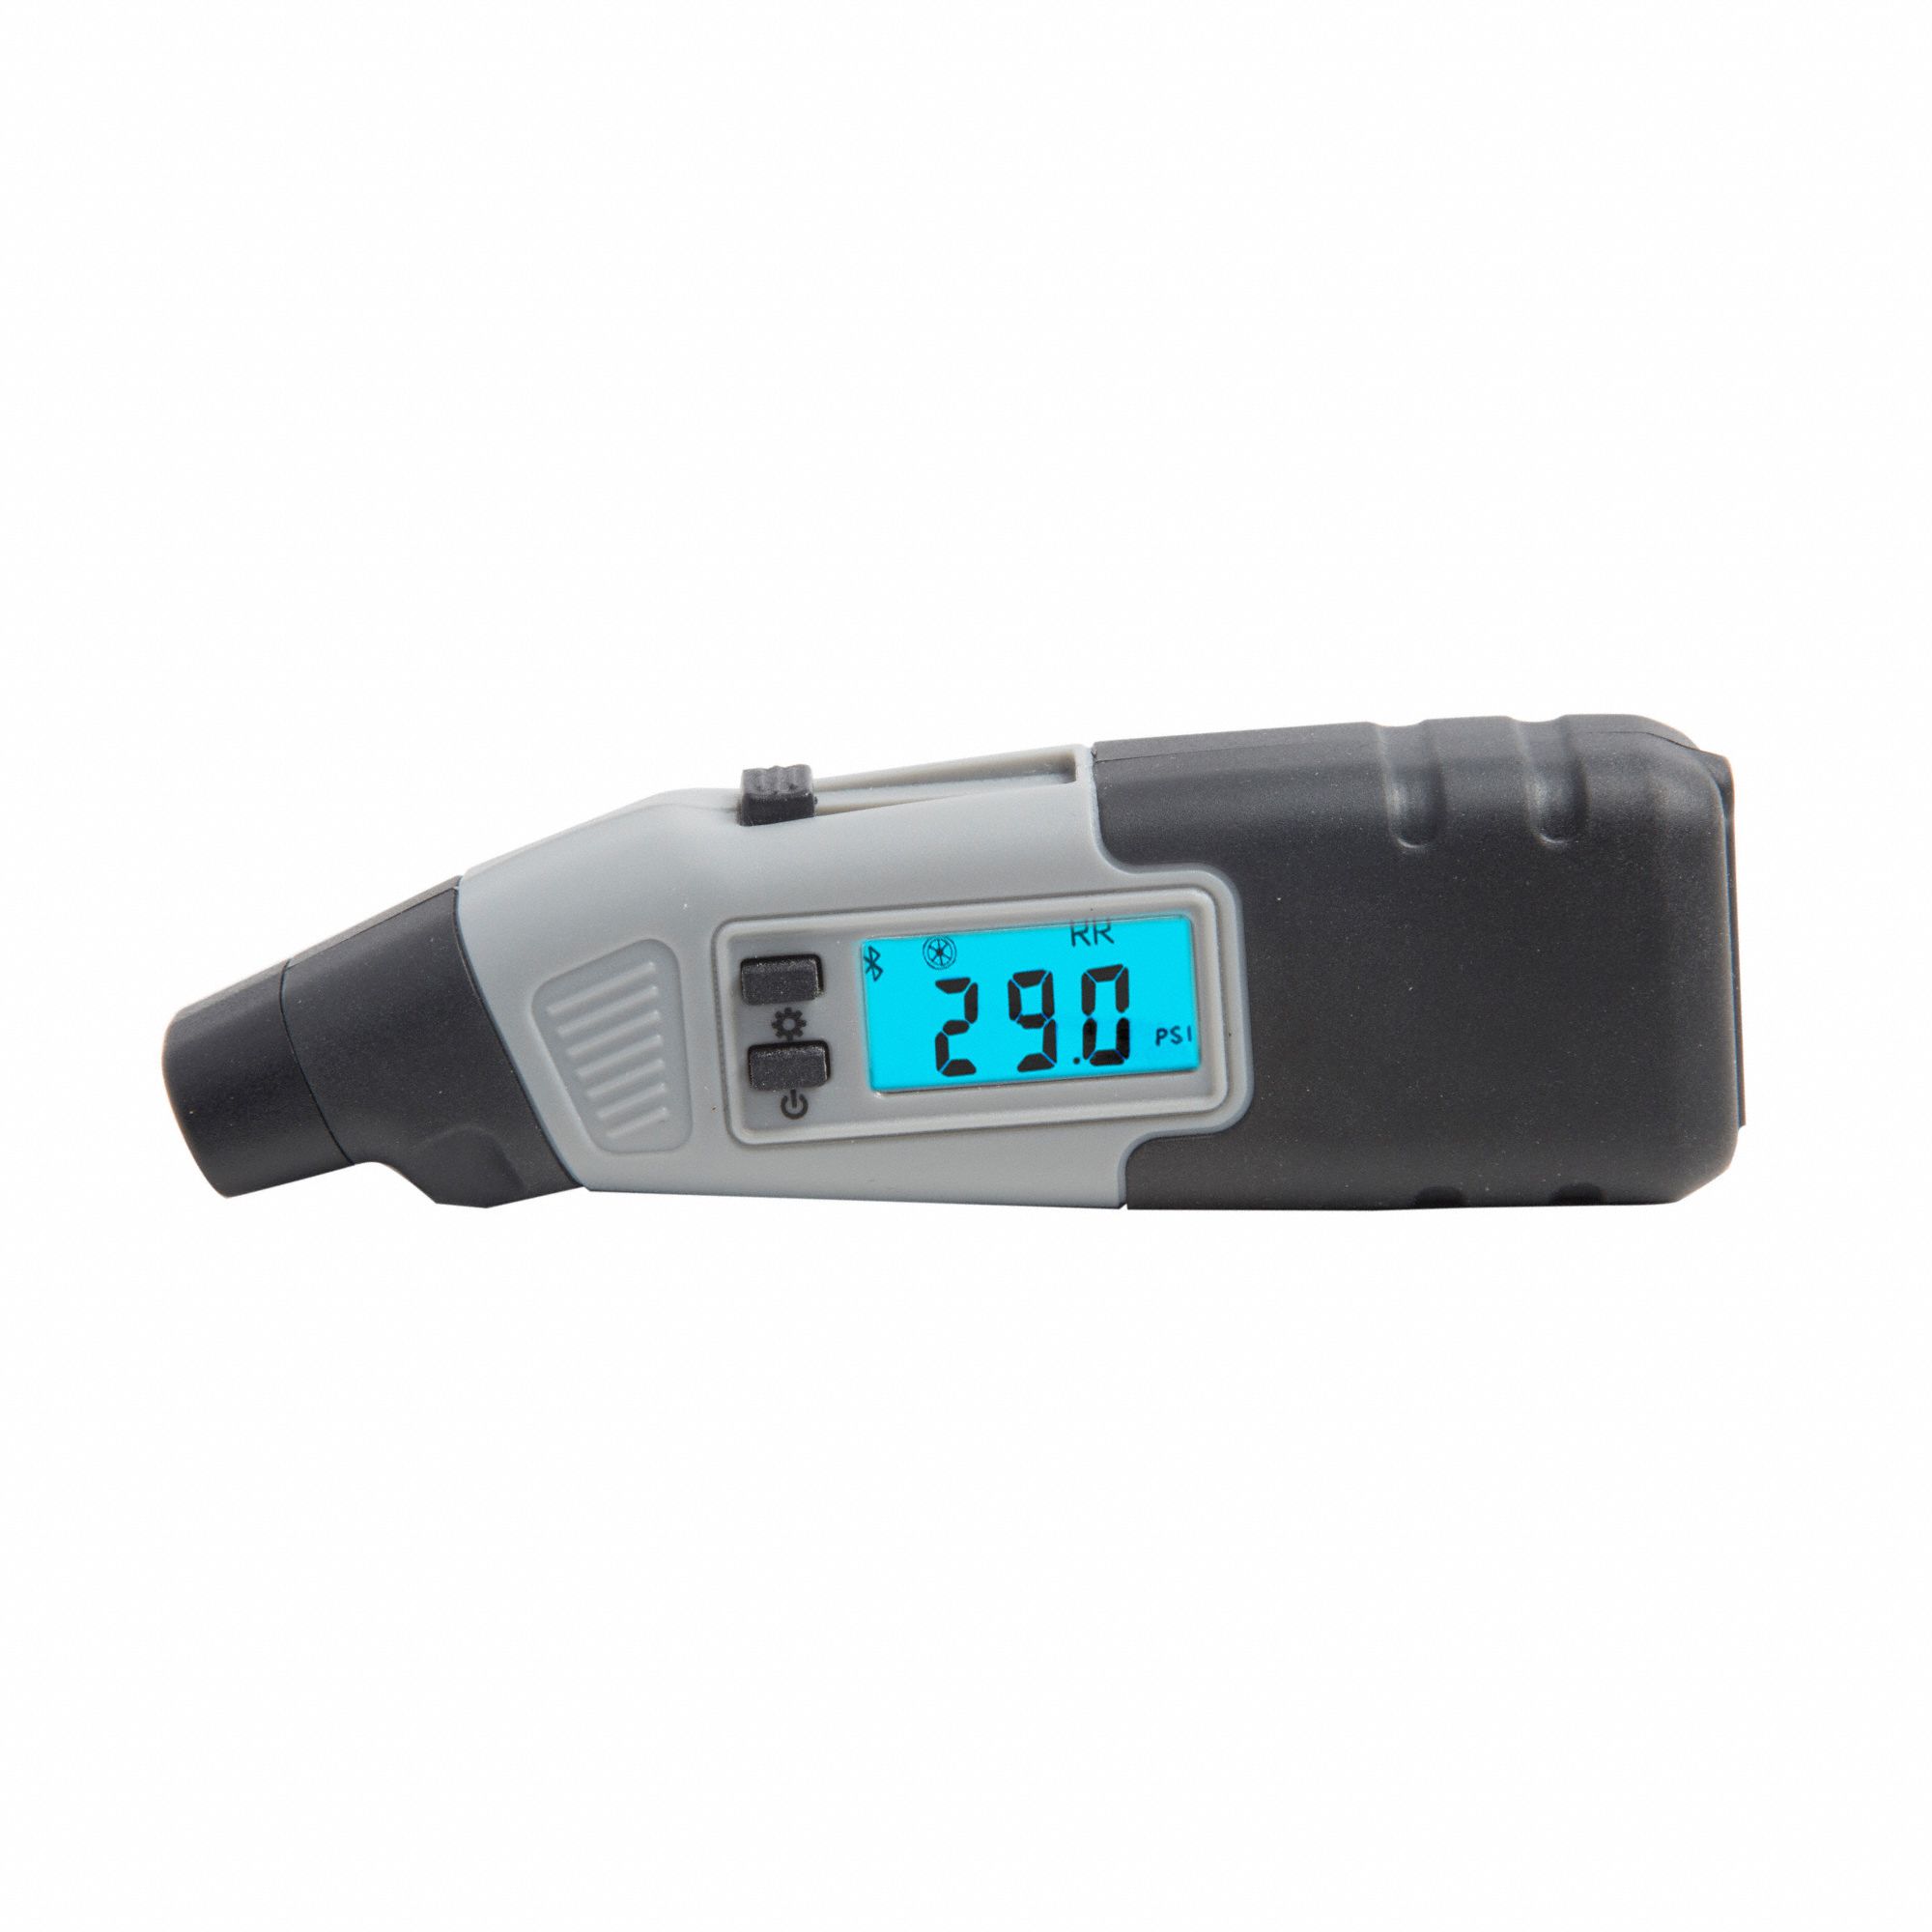 Bluetooth Tire Gauge: 0 to 150 psi, Composite Materials, Tires, 4 in Lg